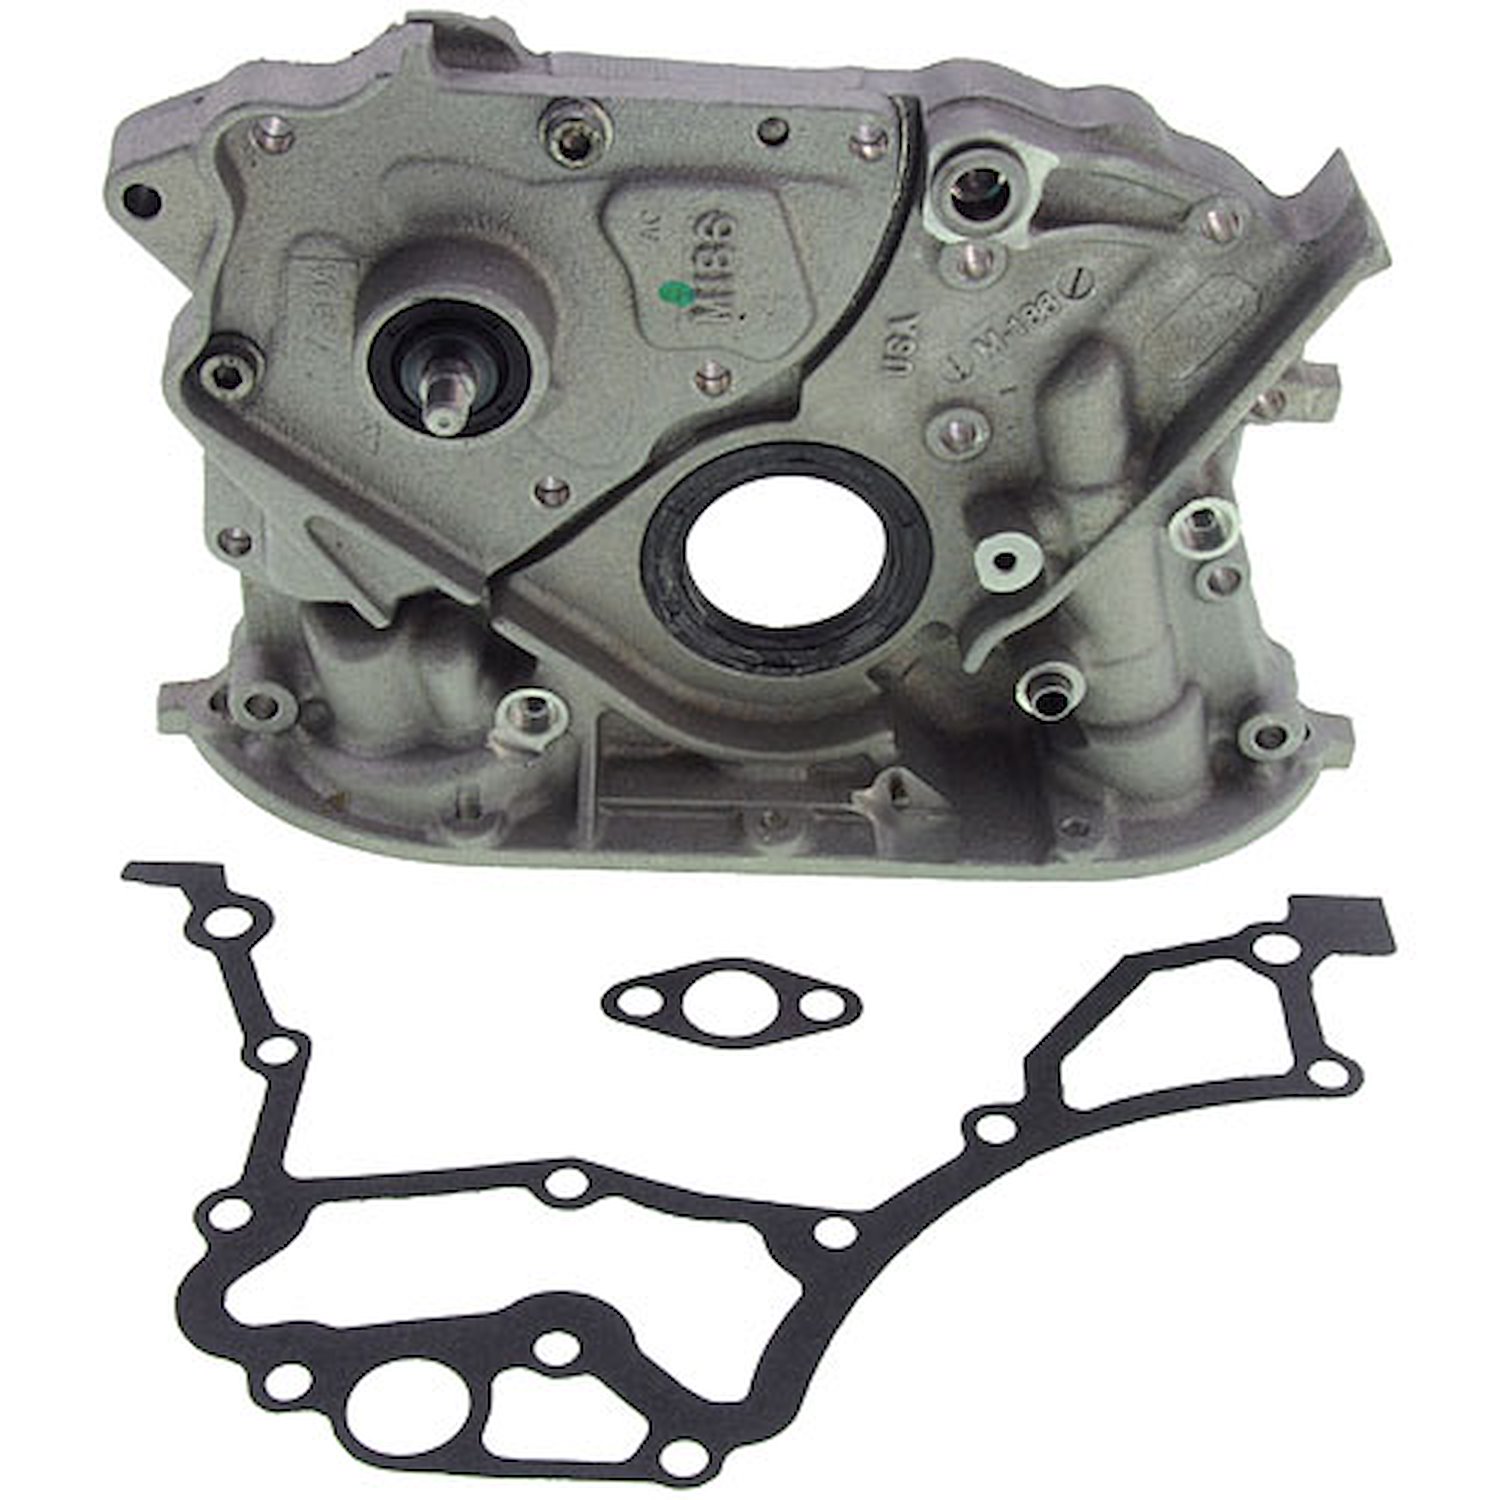 Oil Pump 1992-2001 Toyota Camry 2.2L 4 Cylinder